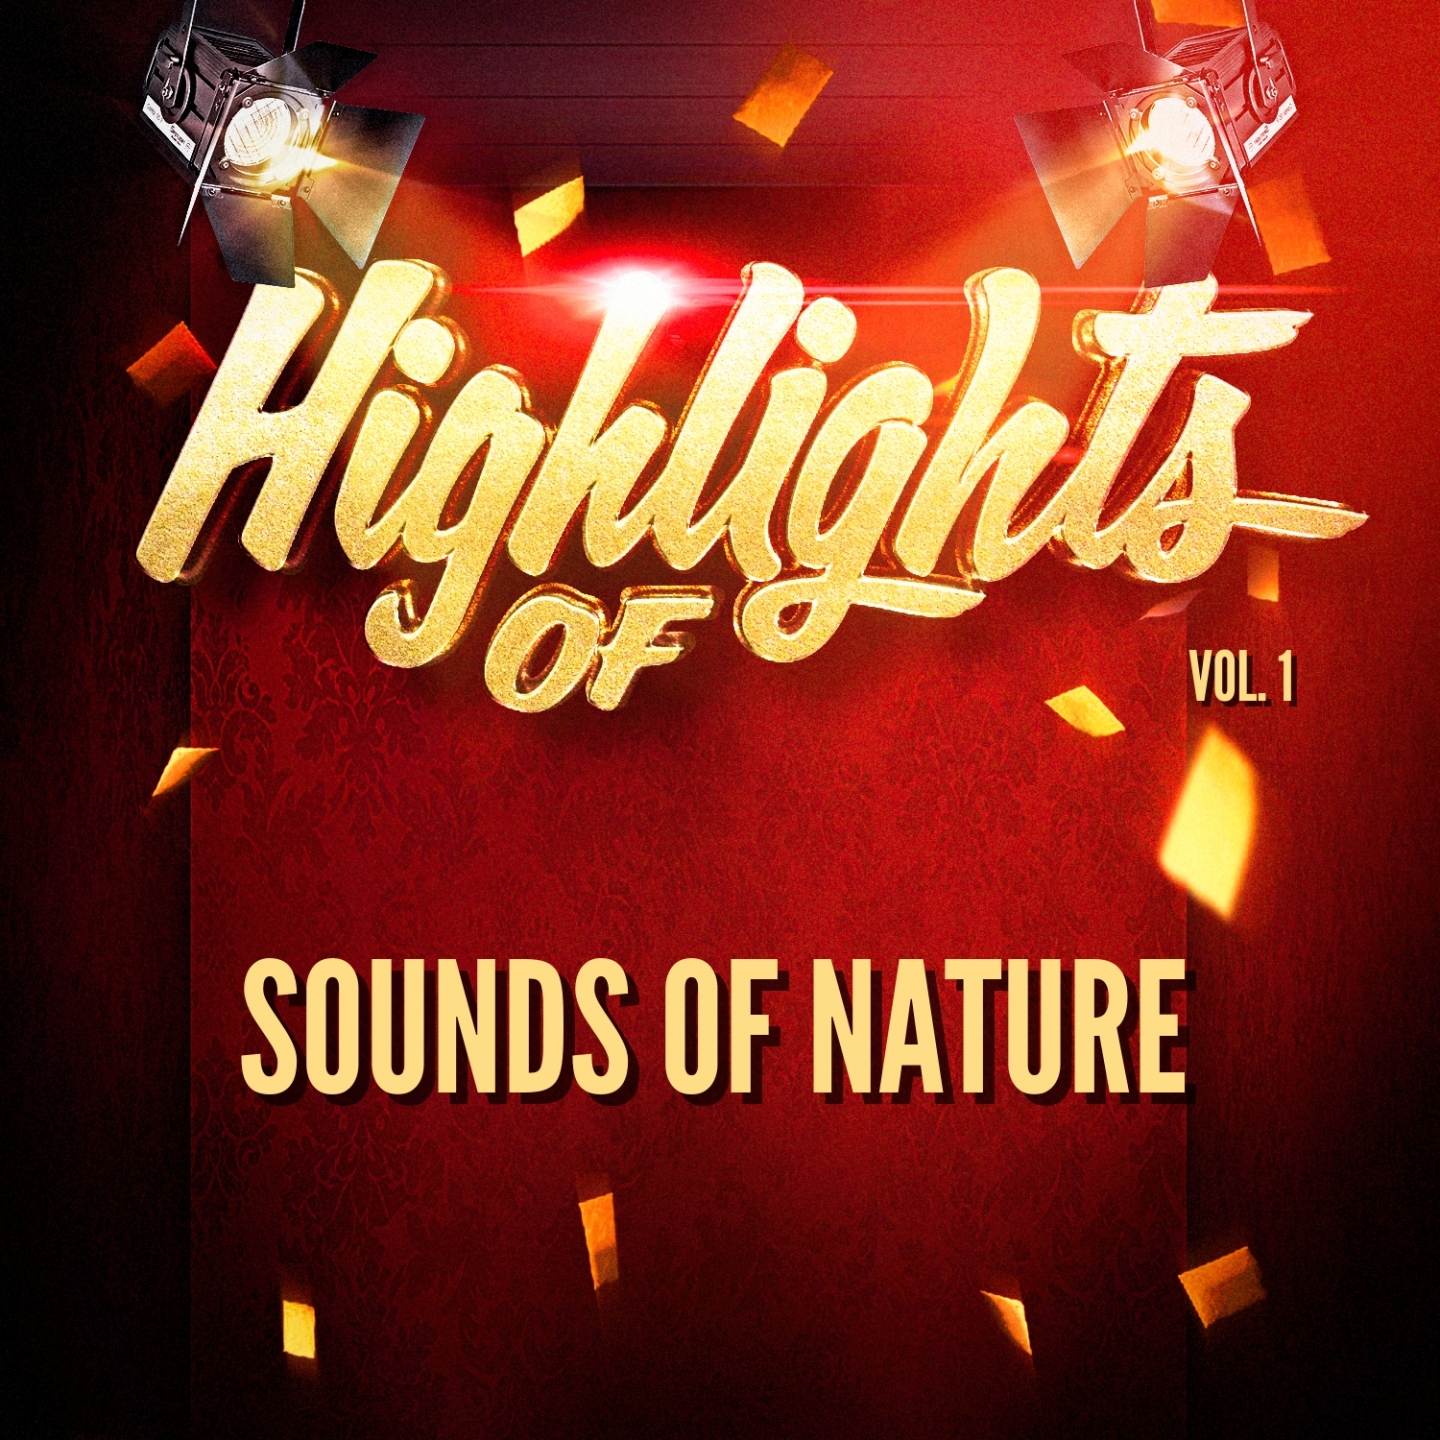 Highlights of sounds of nature, vol. 1